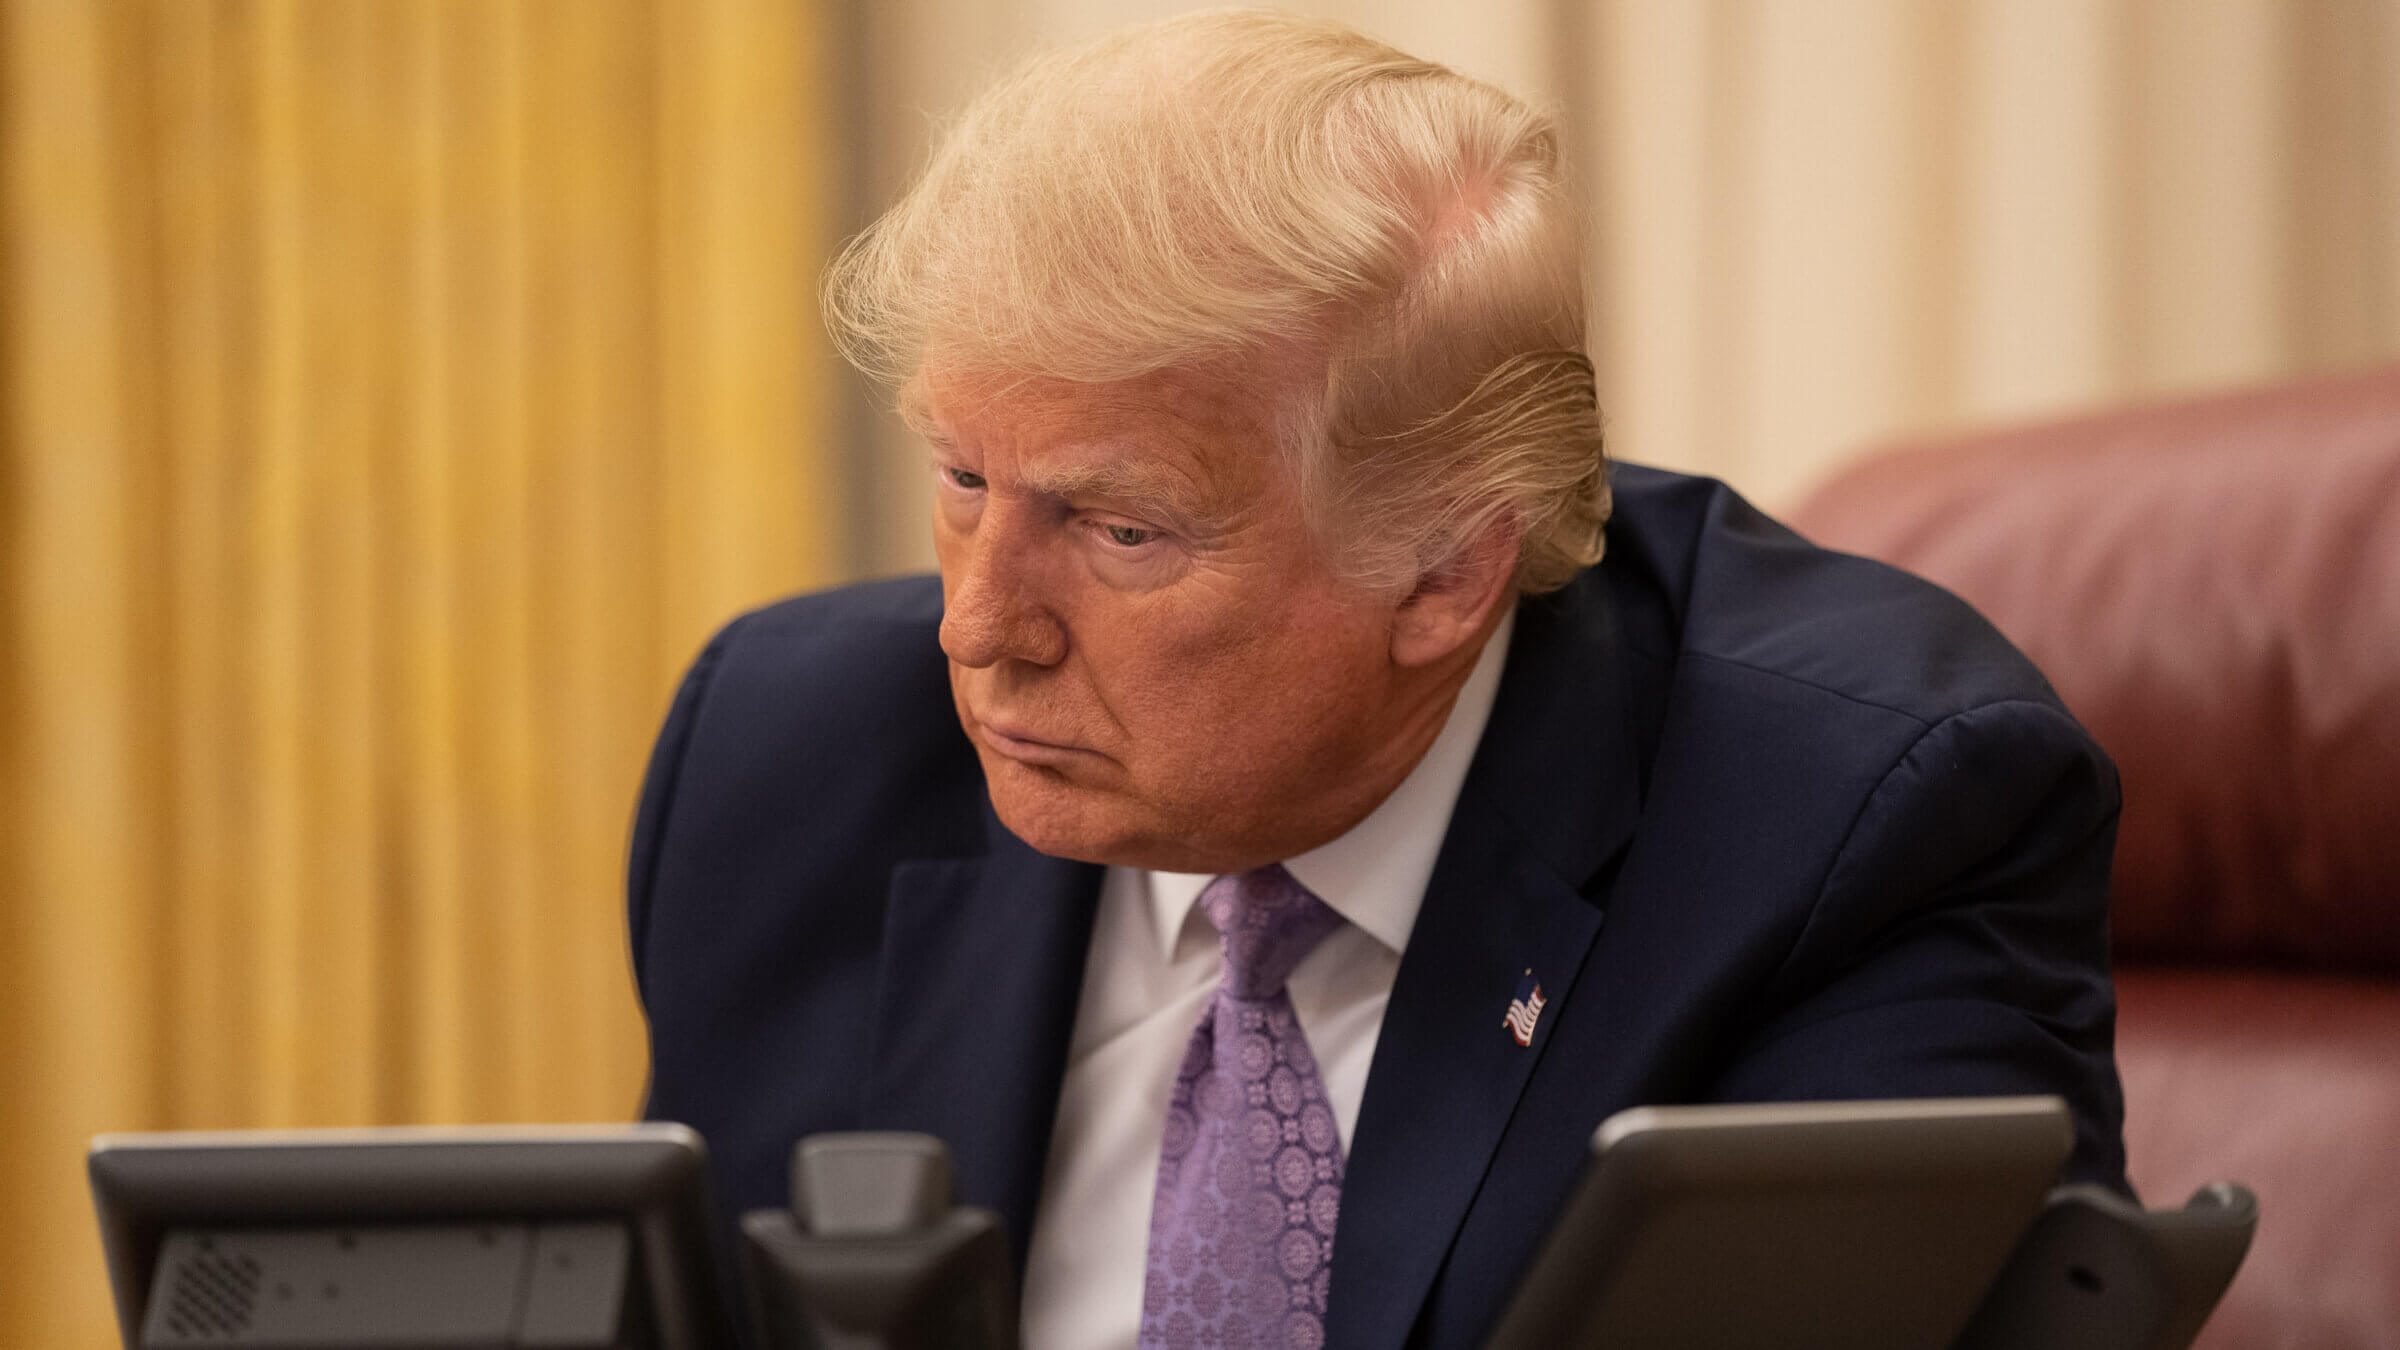 President Donald Trump speaks by phone with Prime Minister Benjamin Netanyahu of Israel and Sheikh Mohammed Bin Zayed of the United Arab Emirates on Aug. 13, 2020.